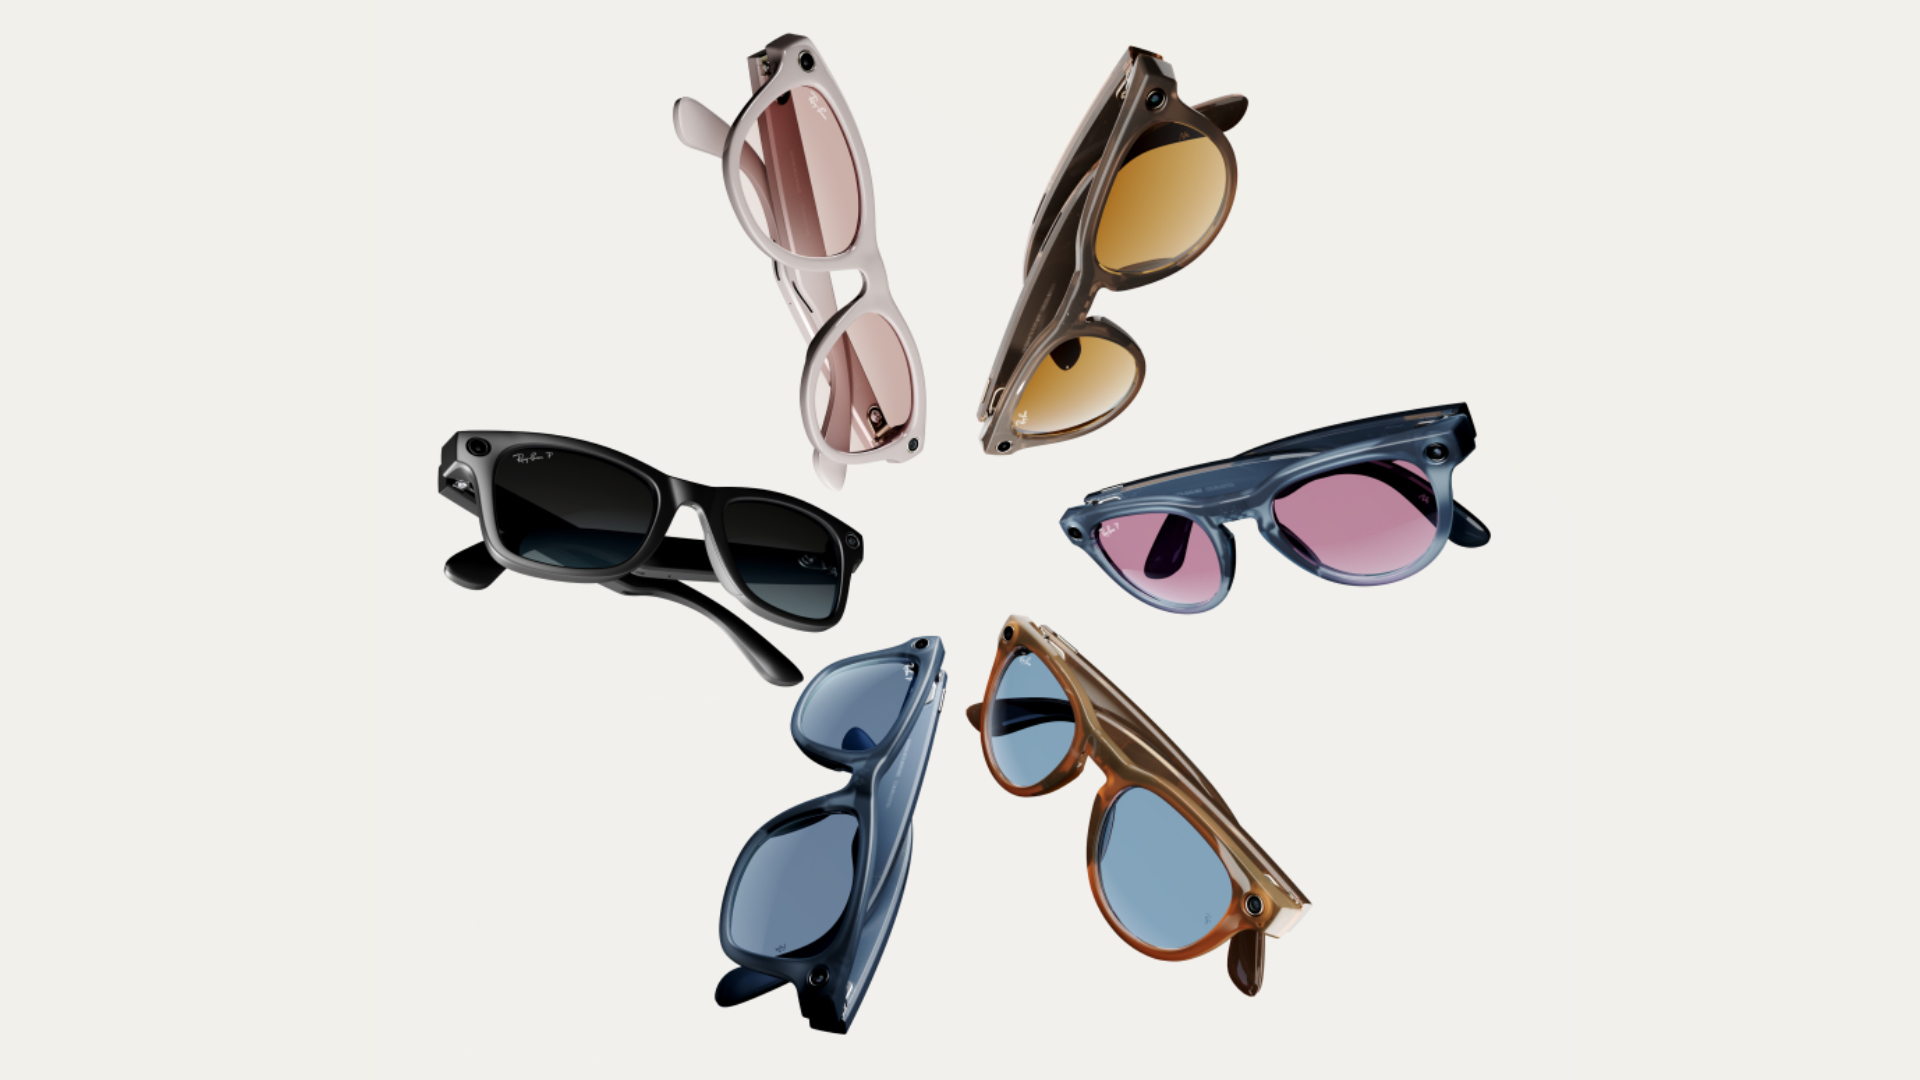 New color variants for Meta Ray-Ban.